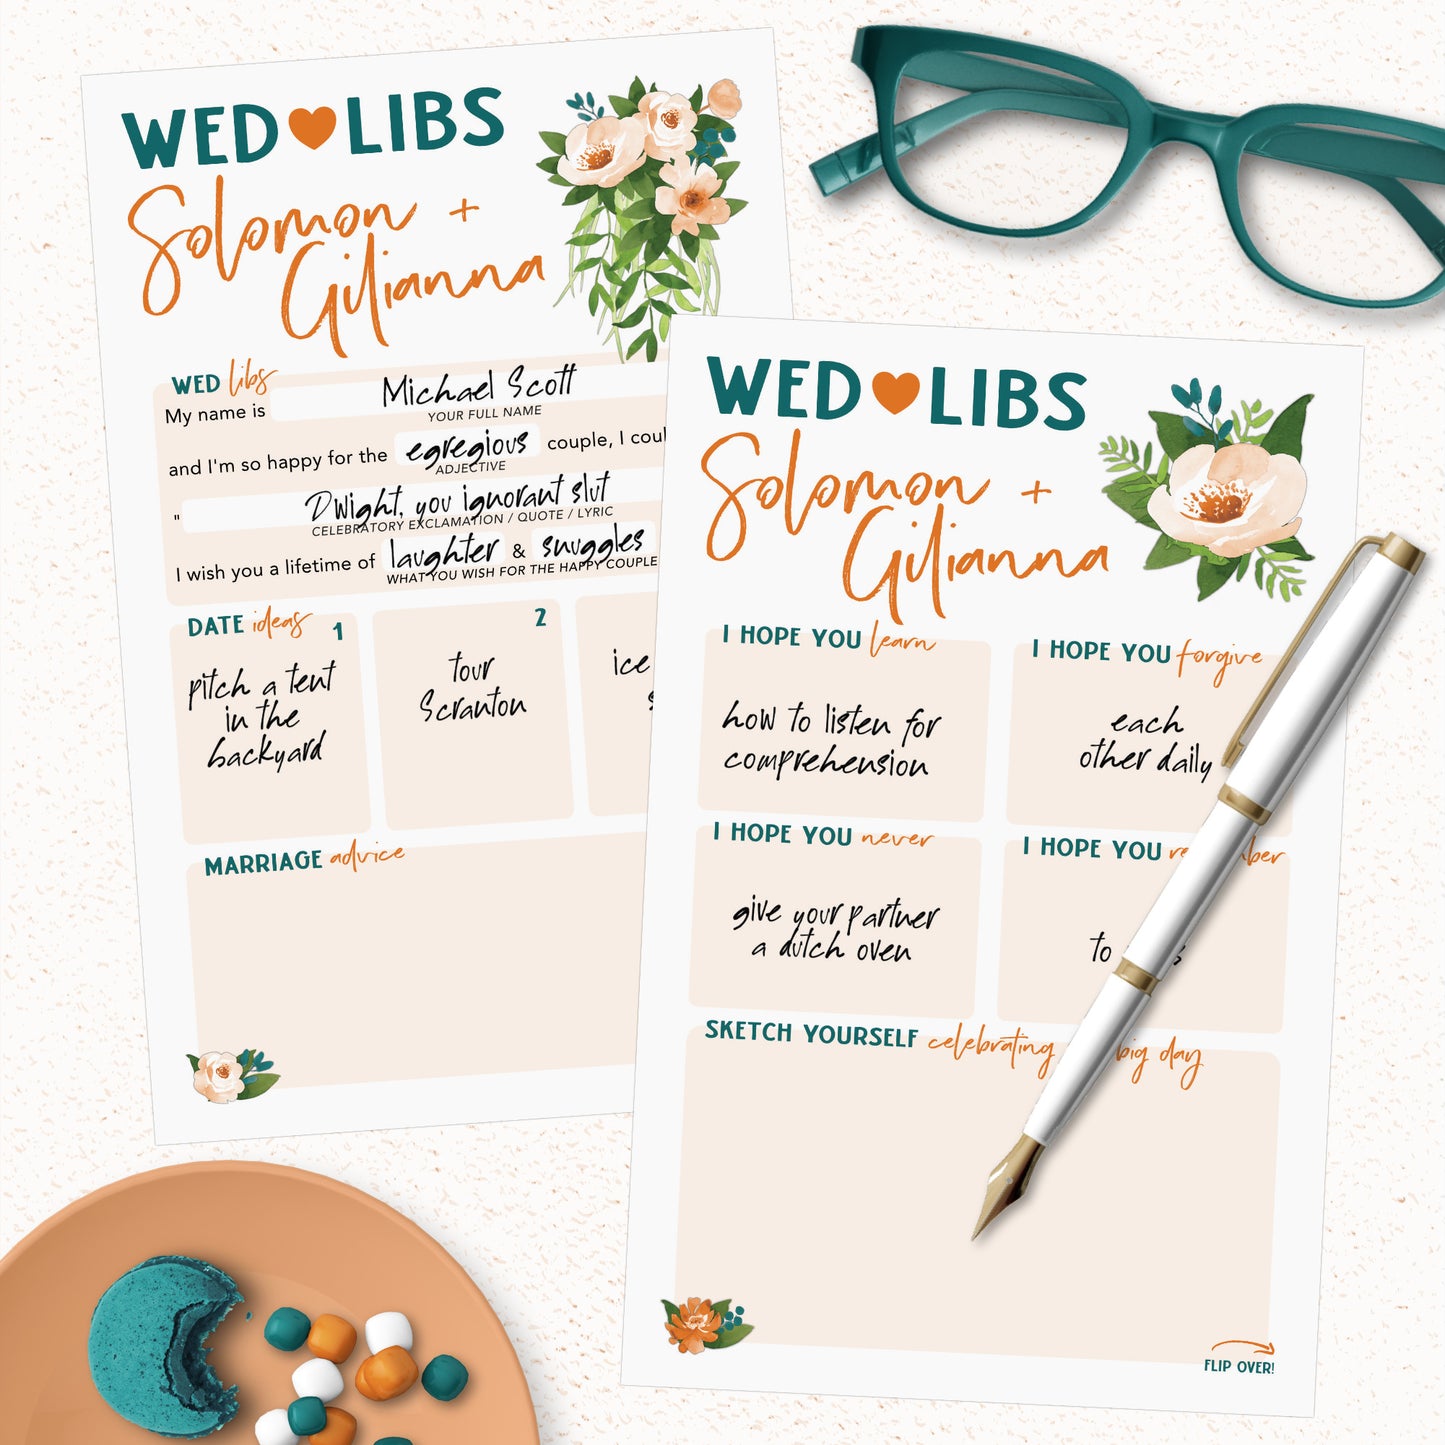 Personalized Wed Libs - Printed Cards - Well Wishes, Marriage Advice, Madlib Game - Wedding Guest Book - Floral Tropical Plants - Rehearsal Dinner - Engagement Party - Bridal Shower - Reception - Bachelorette - Couples Shower Mad Lib